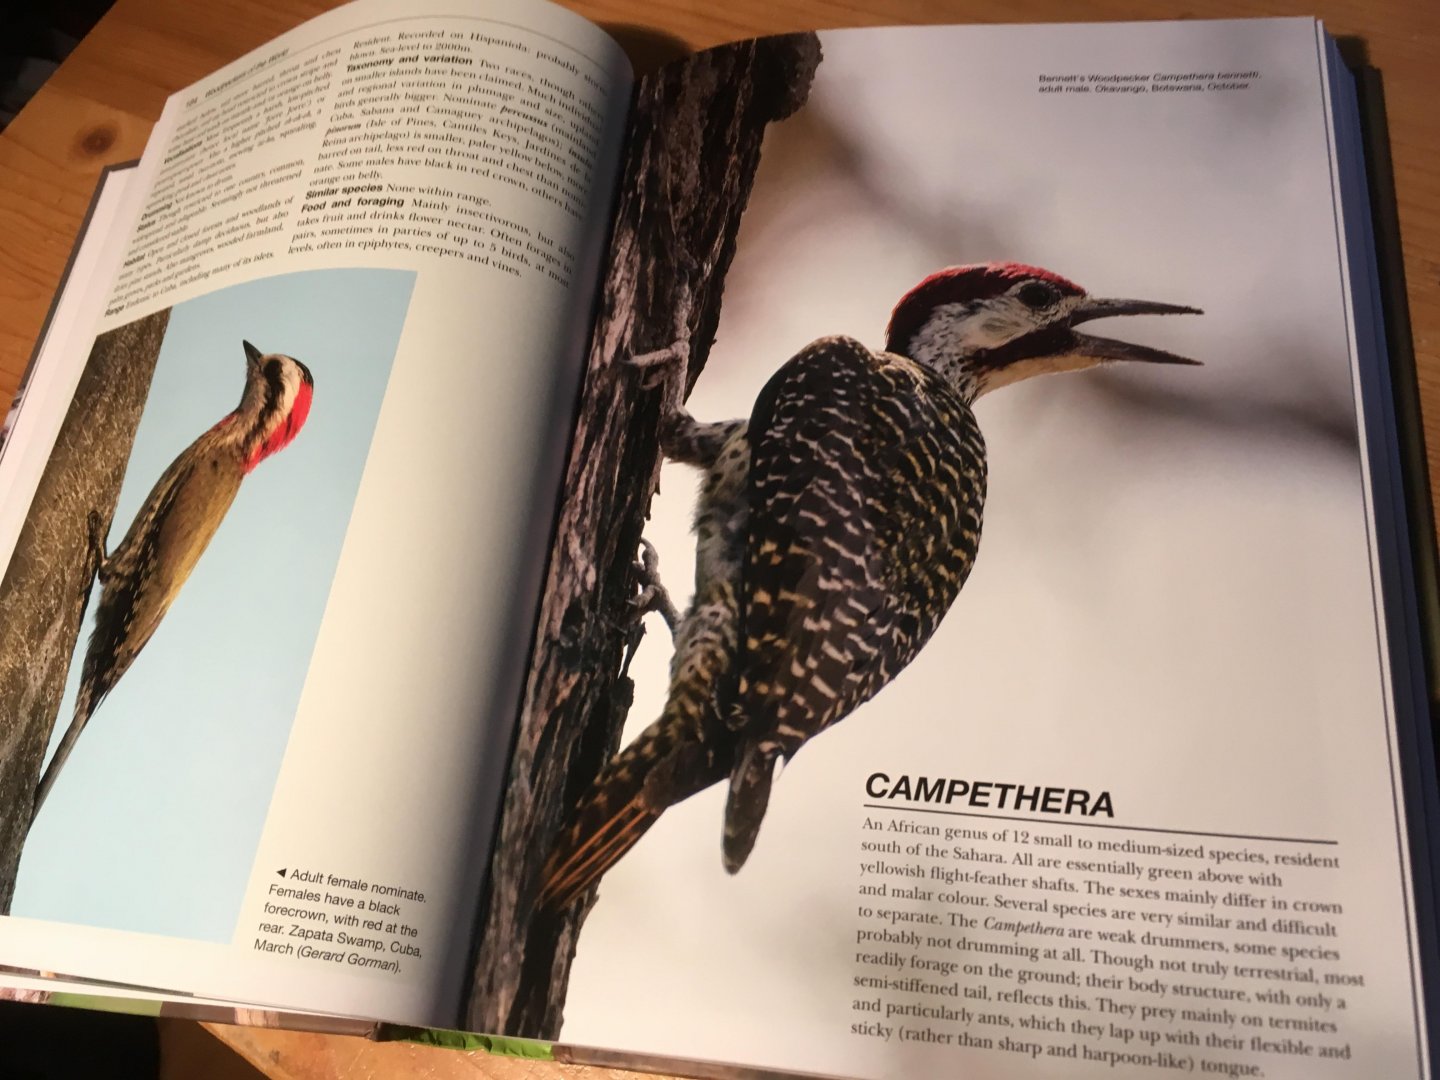 Gorman, G - Woodpeckers of the World - The Complete Guide